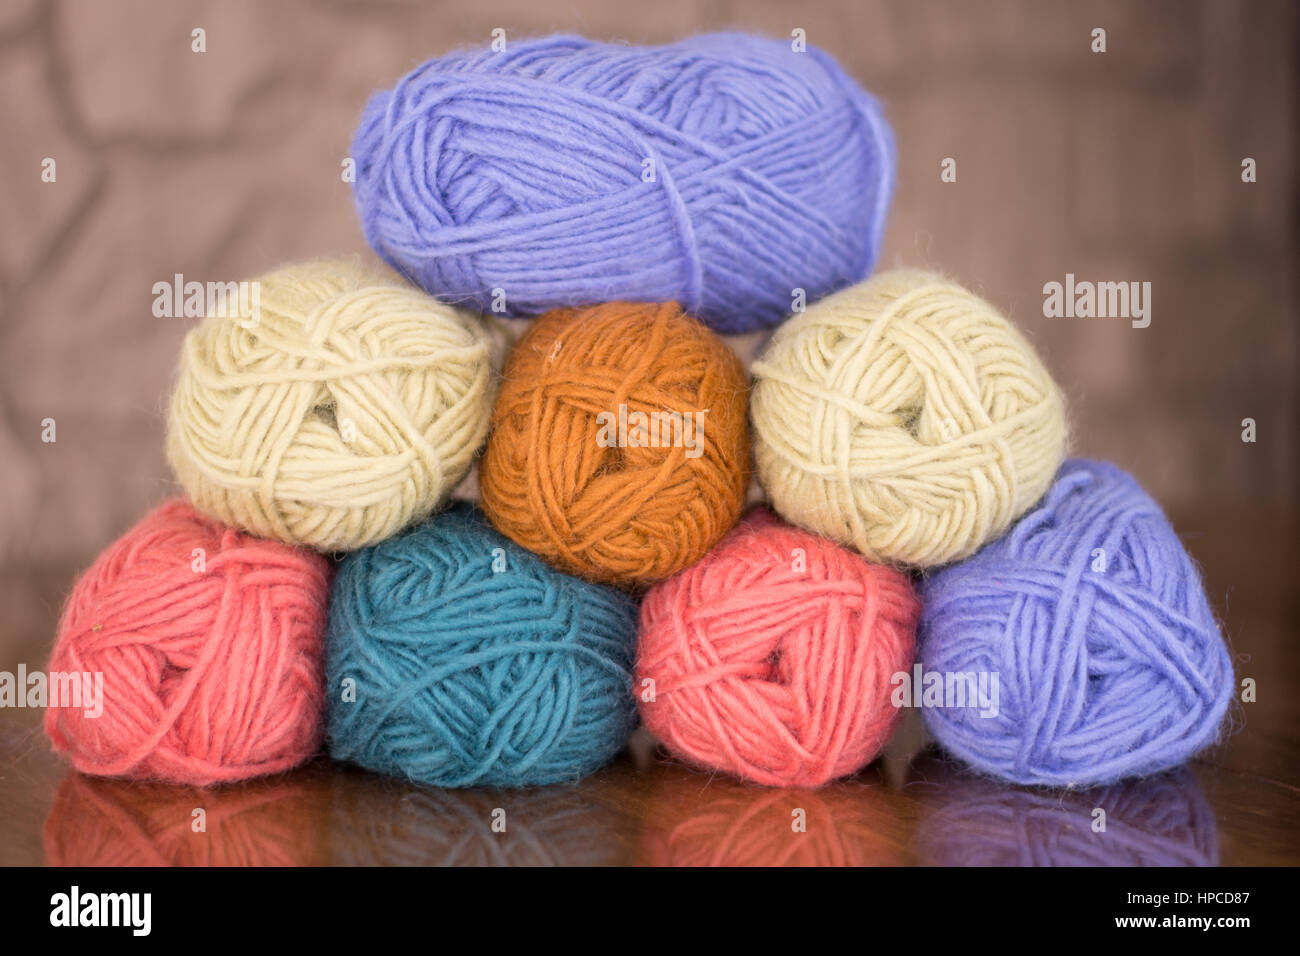 Eight skeins of lavender, gold, turquoise, cream and pink yarn stacked in a pyramid on a wood table. A stone wall is in background. Stock Photo